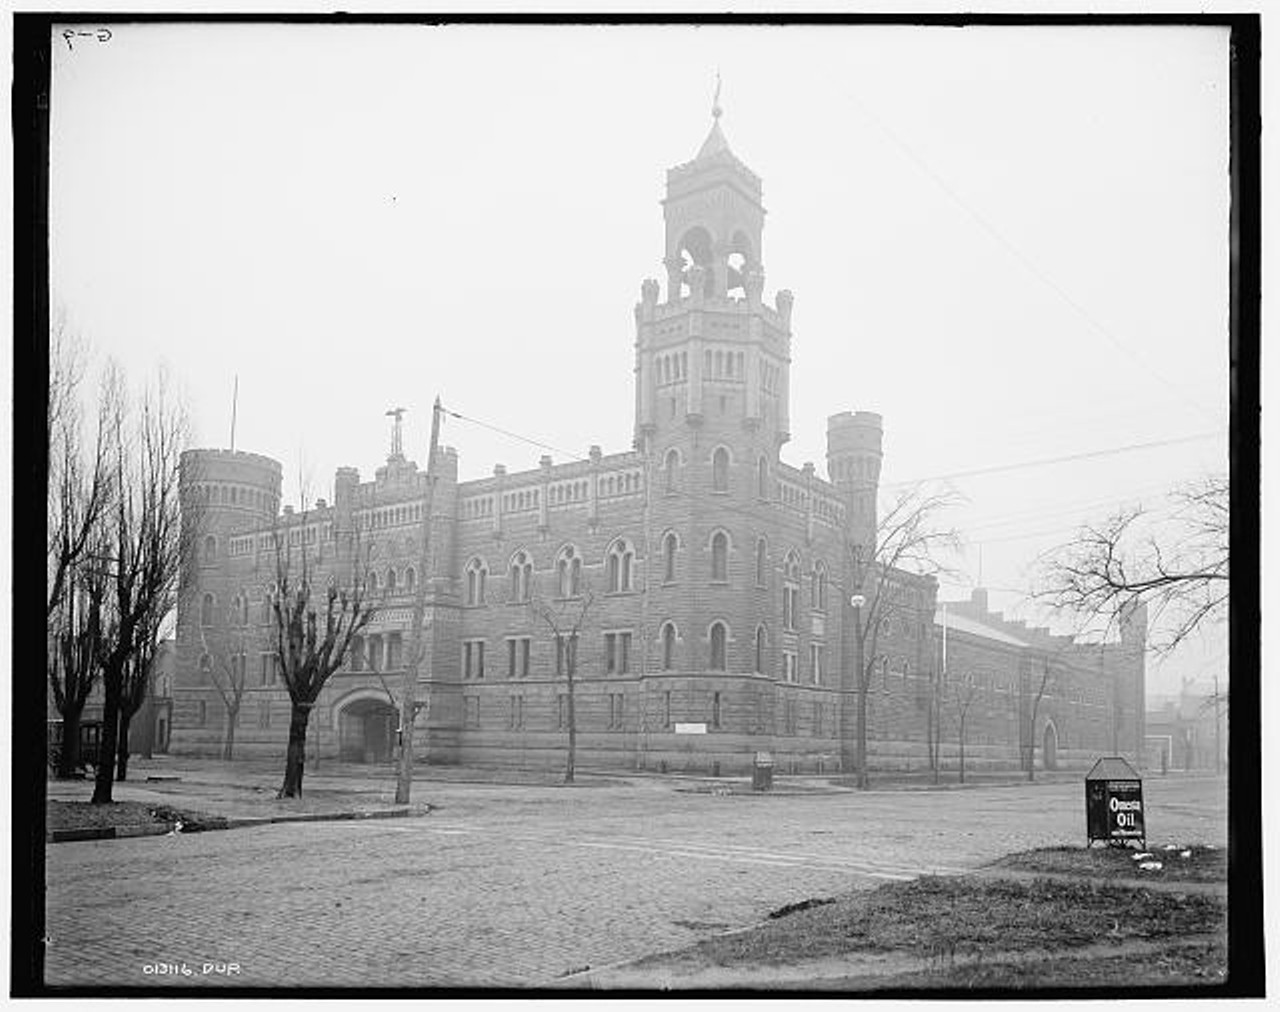 Armory of the Ohio National Guard, 1901.